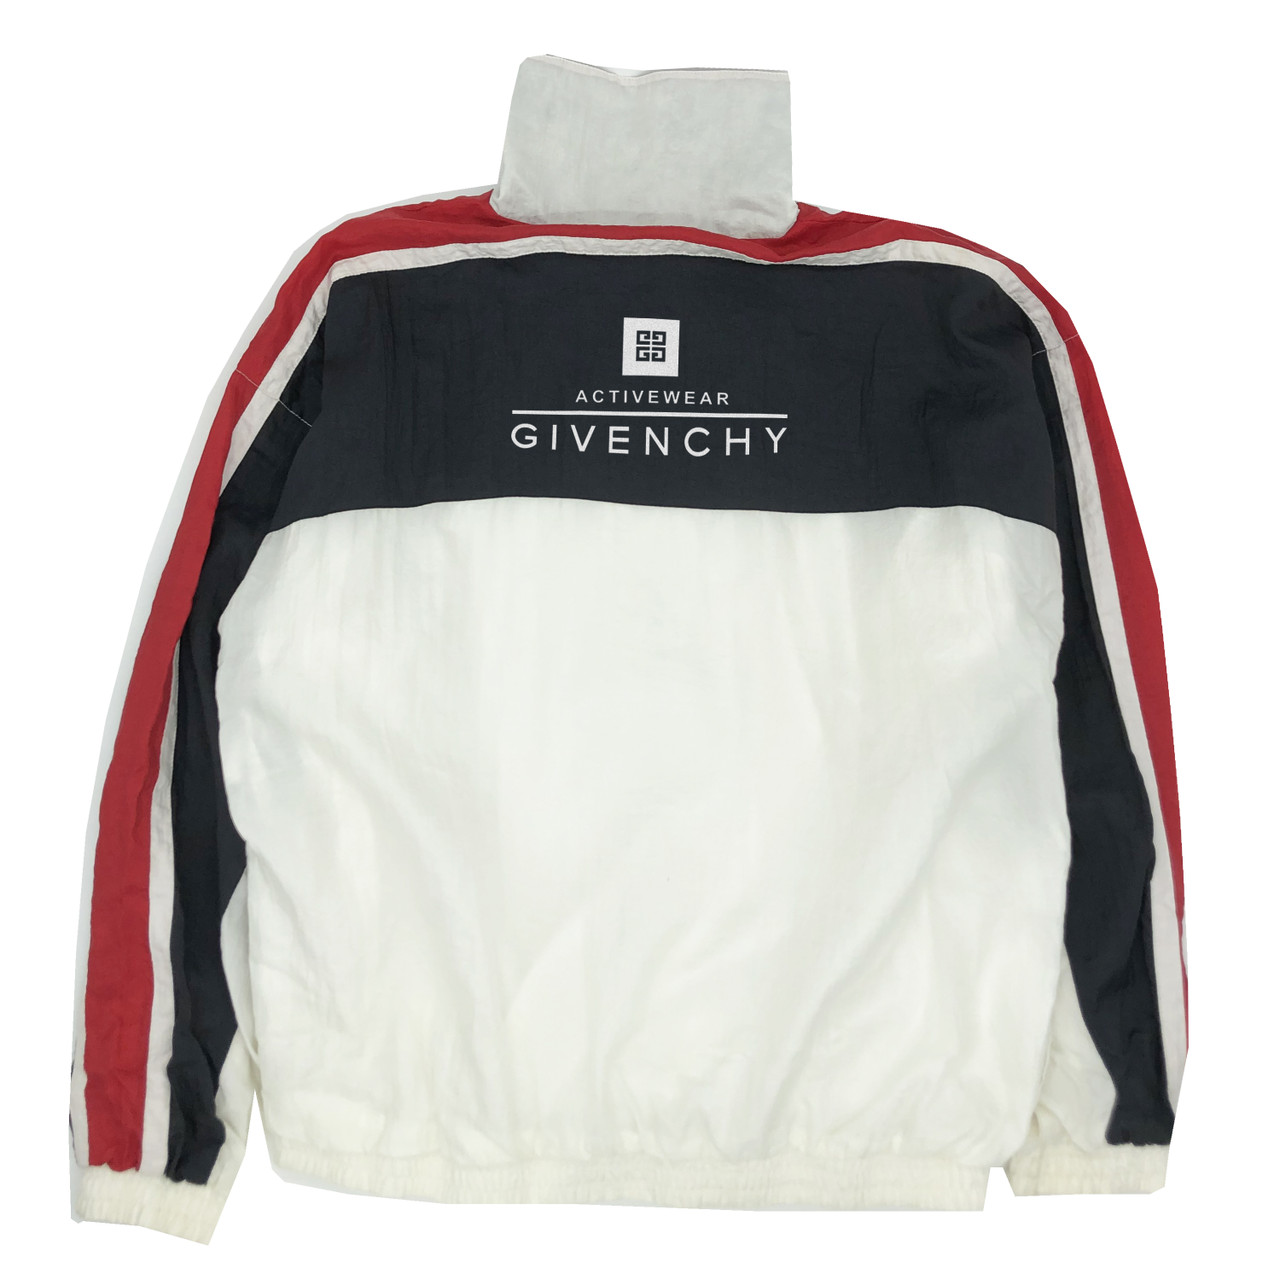 vintage givenchy activewear